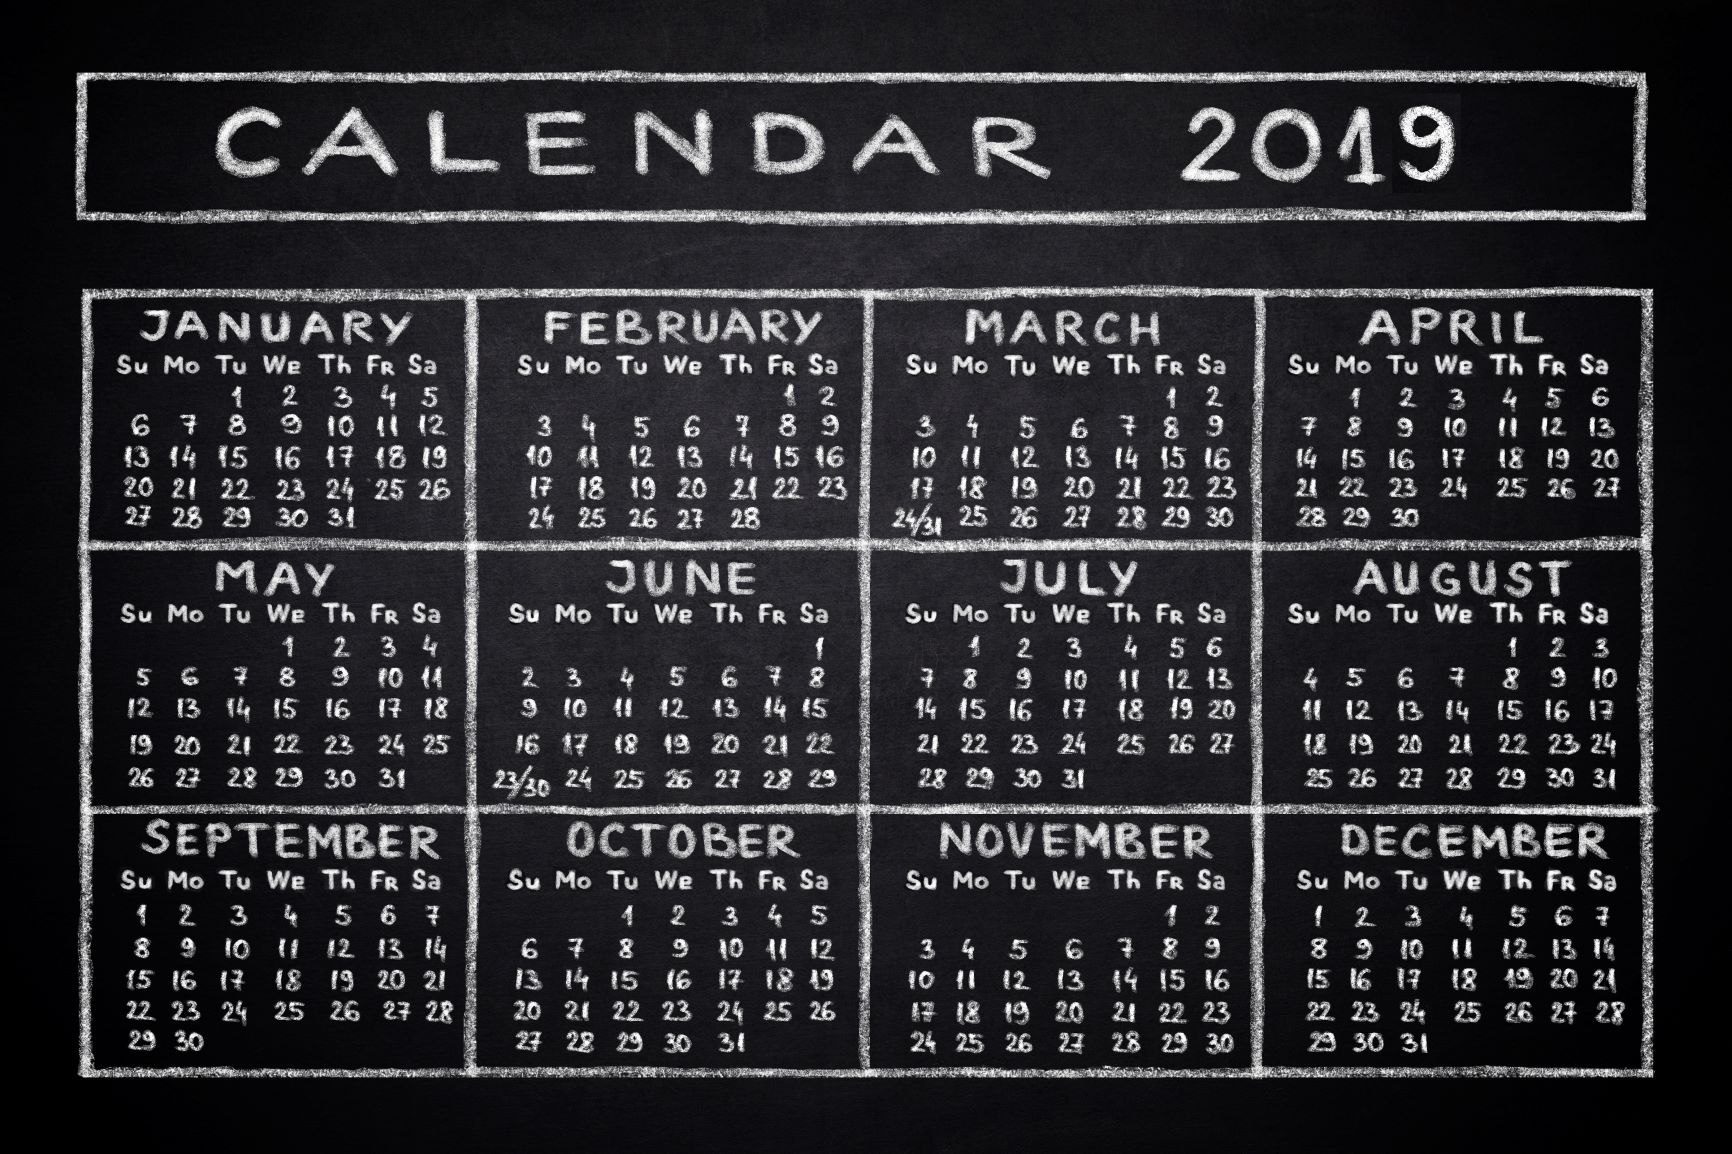 Key 2019 Q4 Tax Deadlines for Businesses